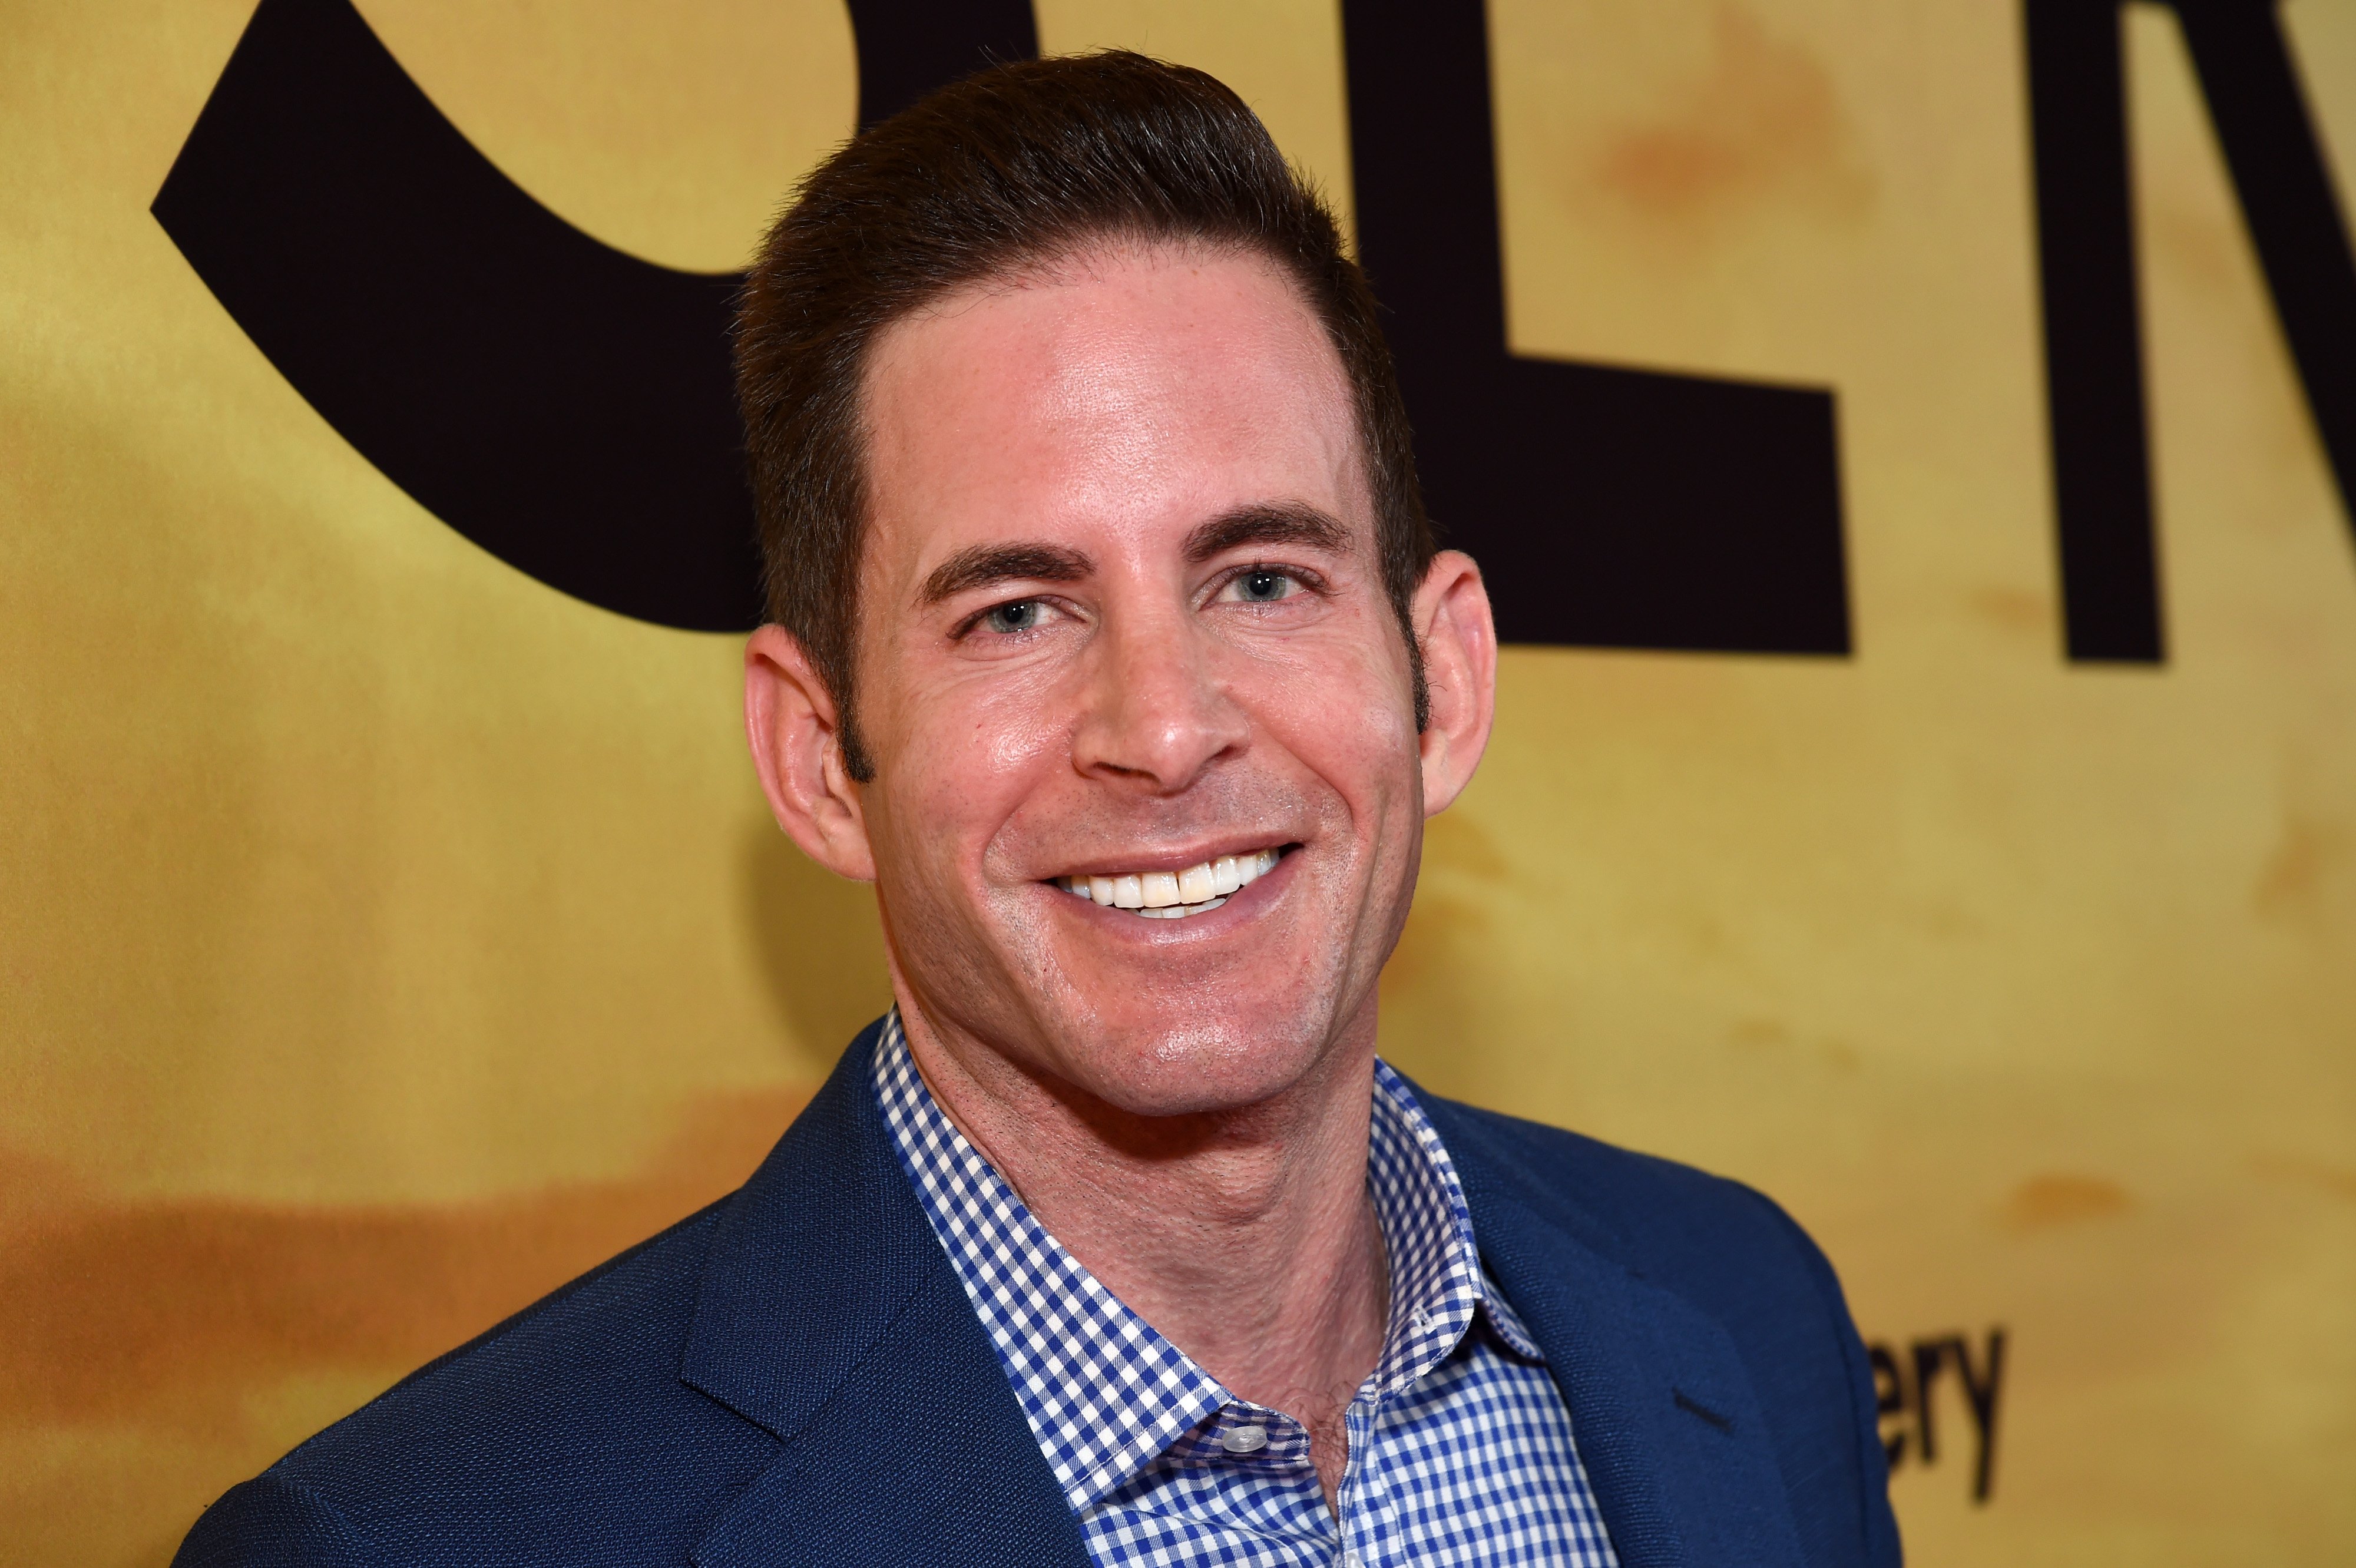 Tarek El Moussa attends the premiere of "Serengeti" in Beverly Hills, California on July 23, 2019 | Photo: Getty Images